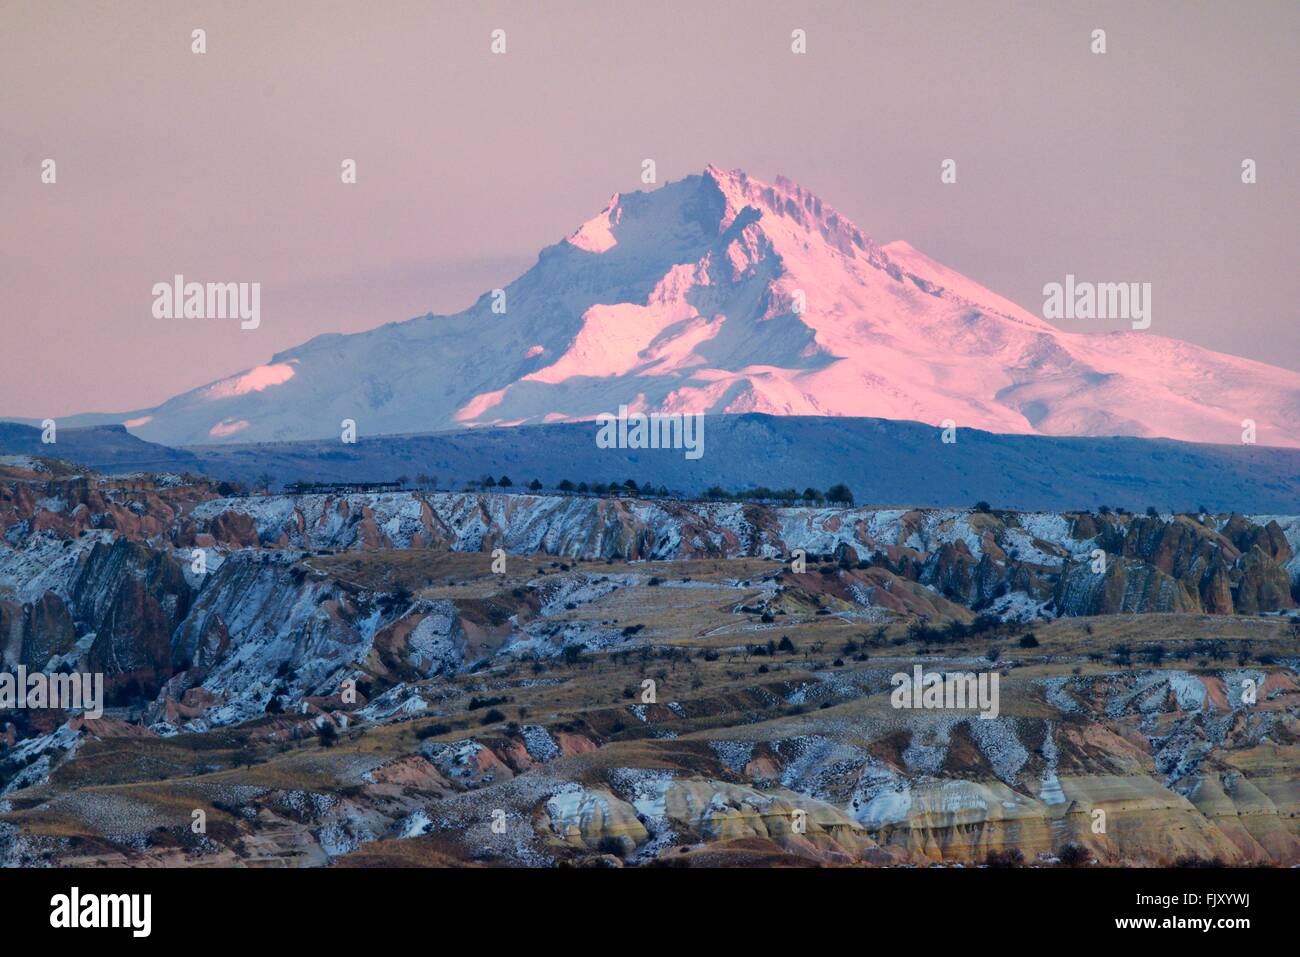 Snow covered volcanic 3916m peak of Mount Erciyes, highest mountain in central Anatolia Turkey. S.E. over gorges of Goreme. Dusk Stock Photo